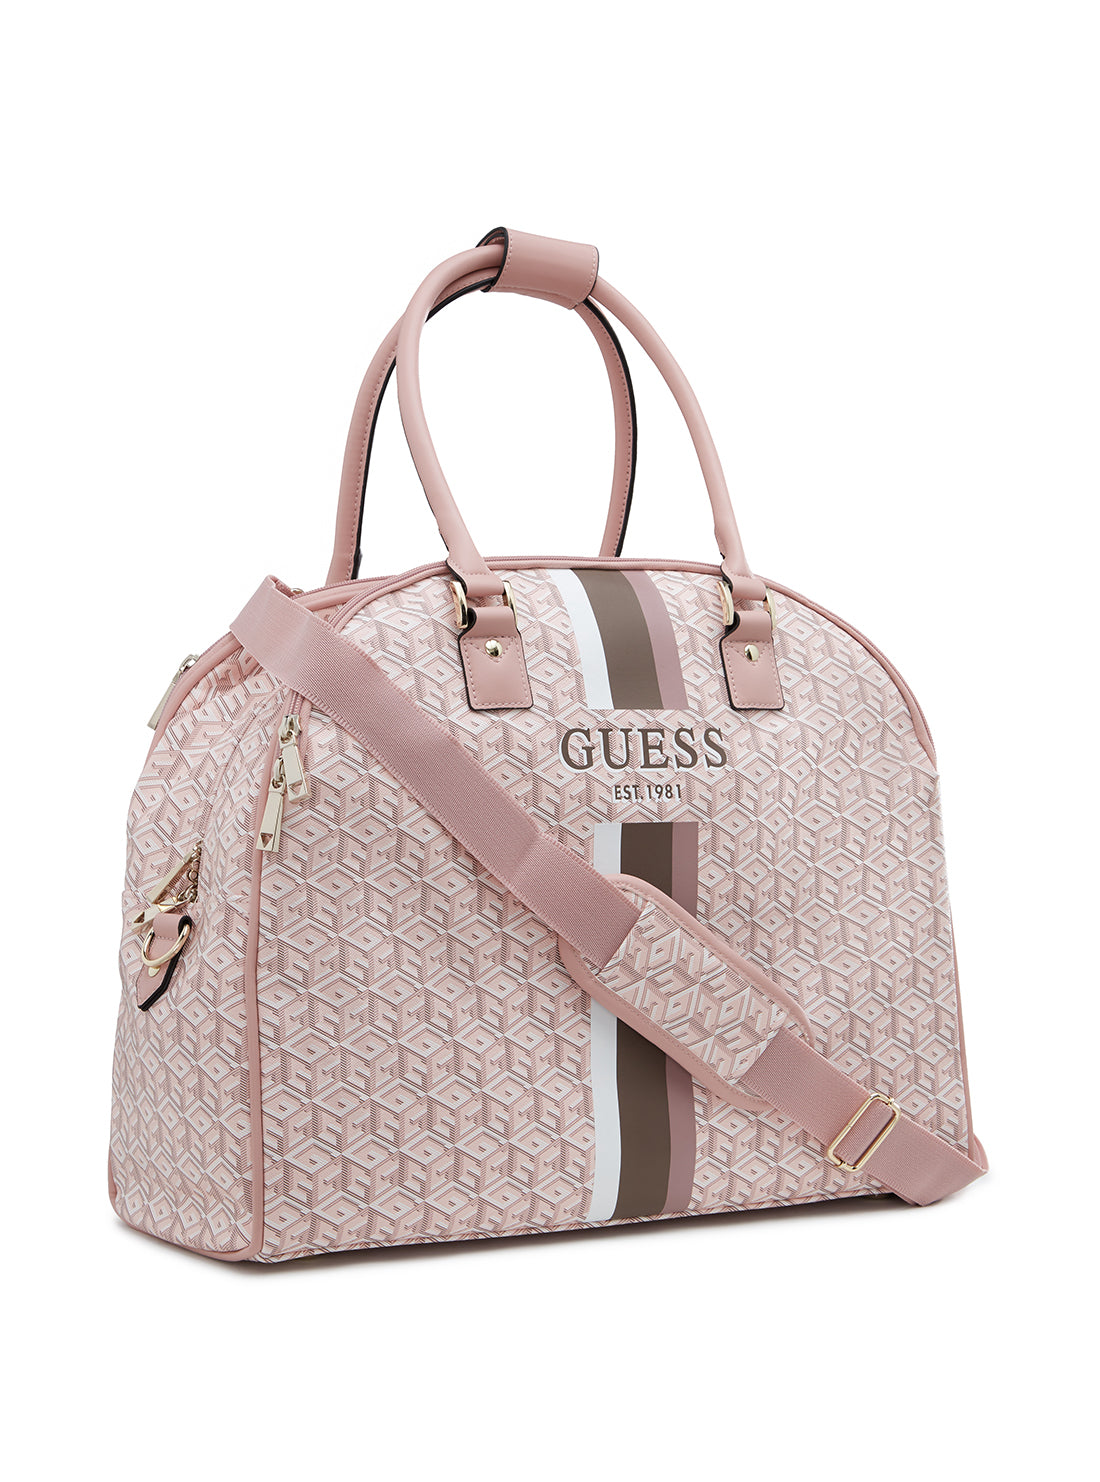 GUESS Women's Rose Logo Wilder Deluxe Dome Bag S7452903 Angle View